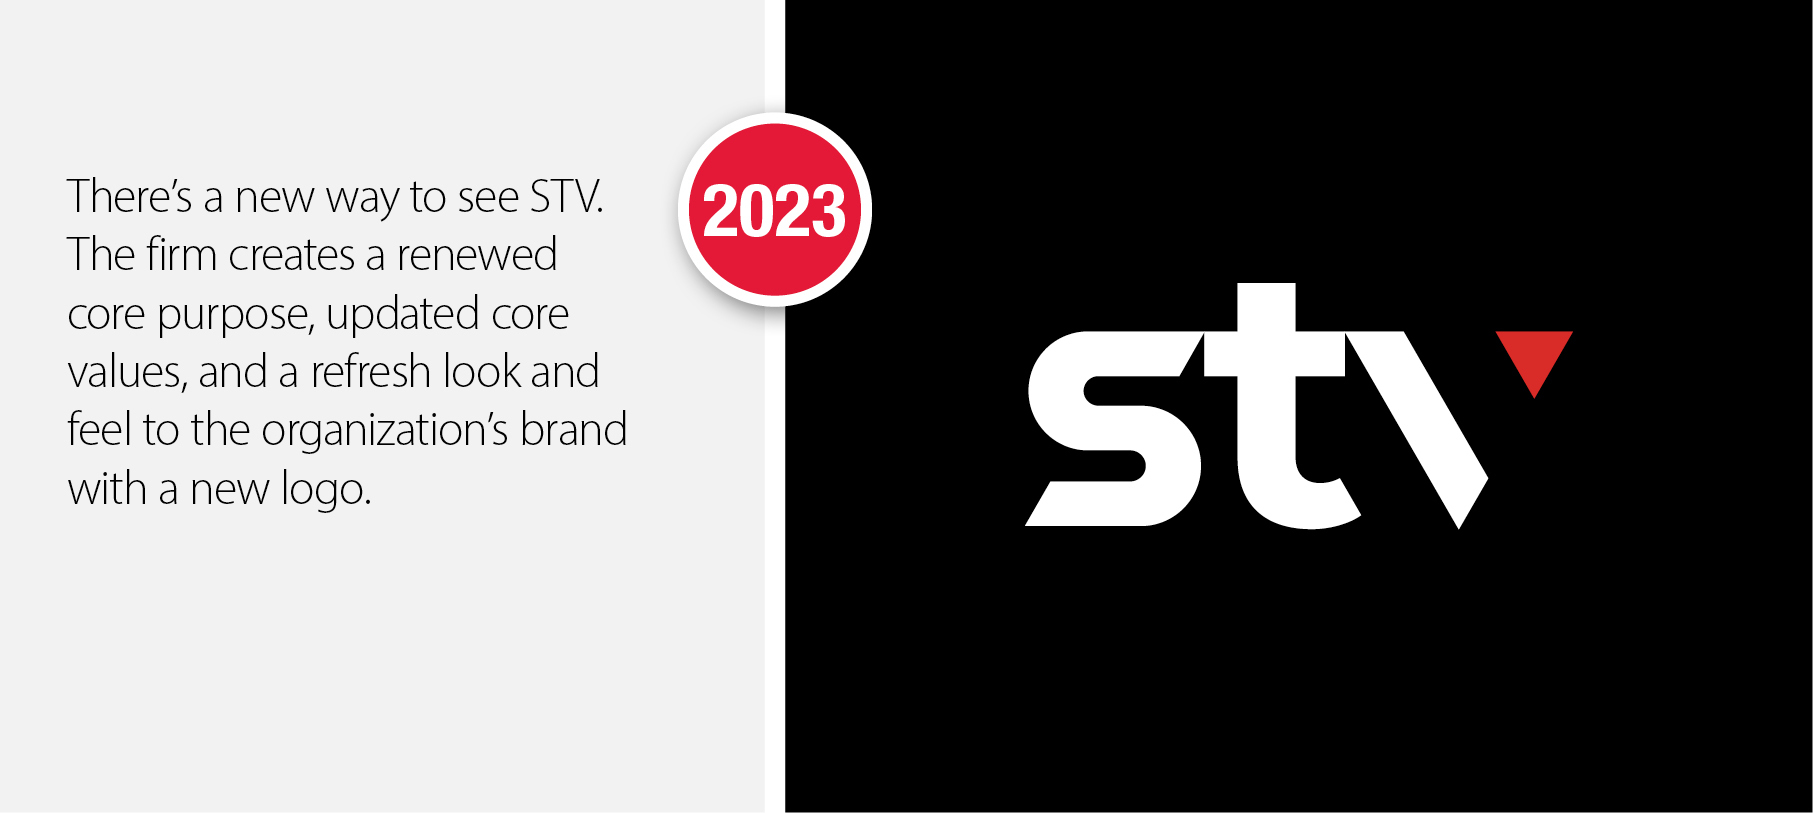 2023 - There's a new way to see STV.